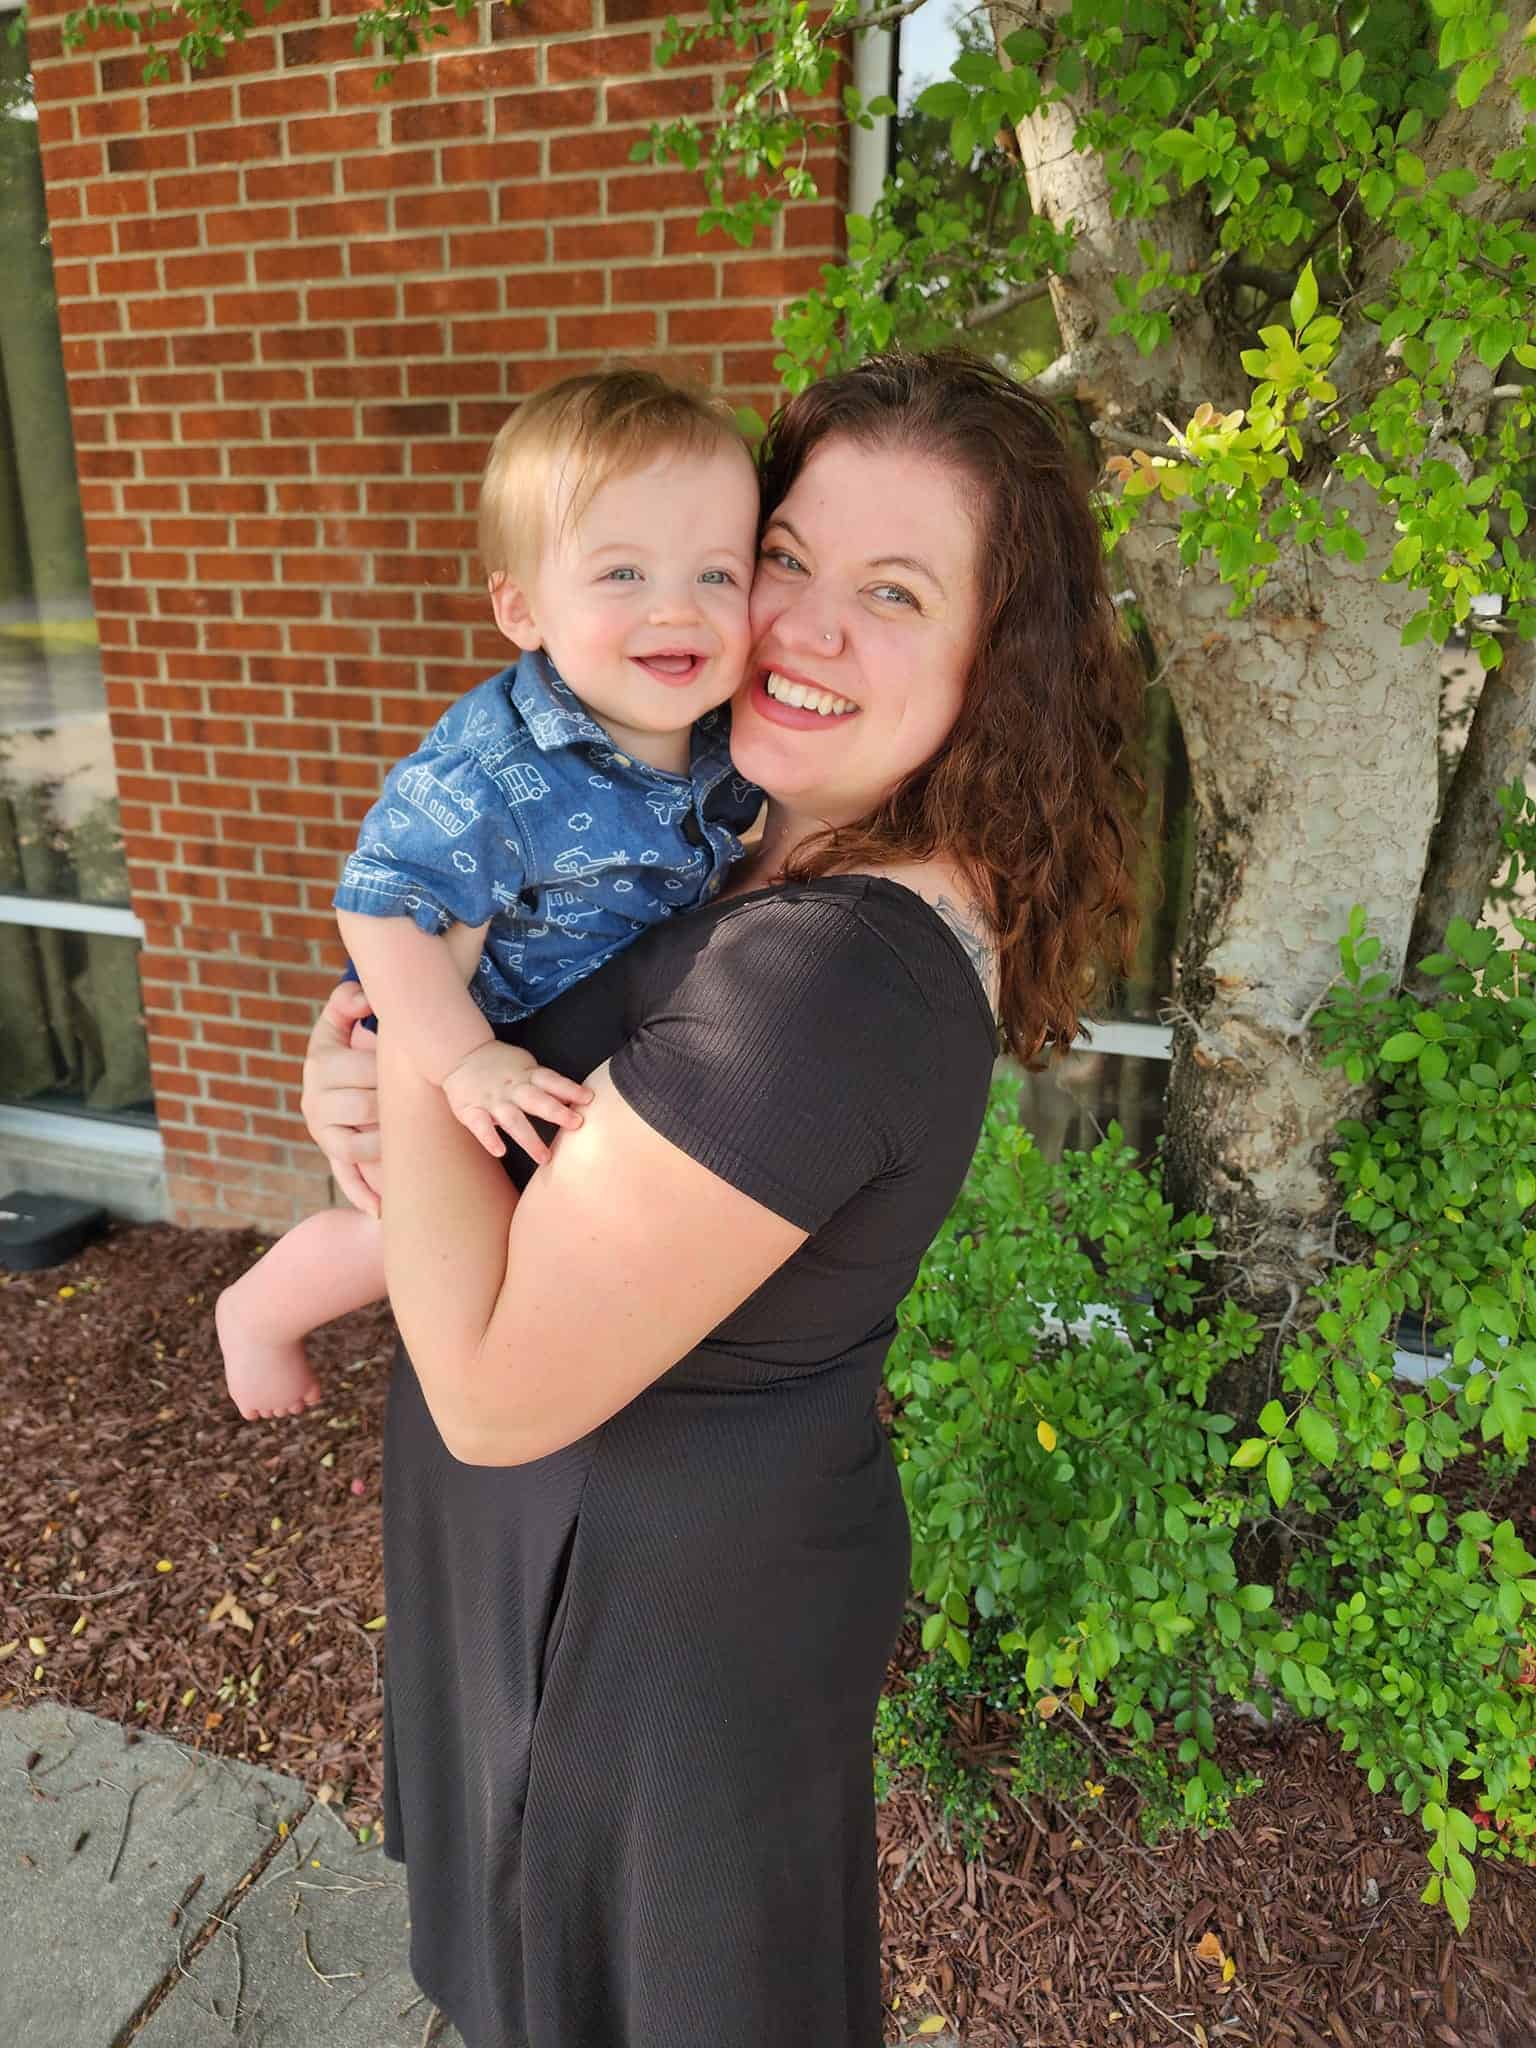 A Raleigh mom blogger shares a sunny embrace with her cheerful toddler, both radiating happiness in a casual outdoor setting with green foliage and a brick backdrop, epitomizing the warmth and joy of family life in Raleigh